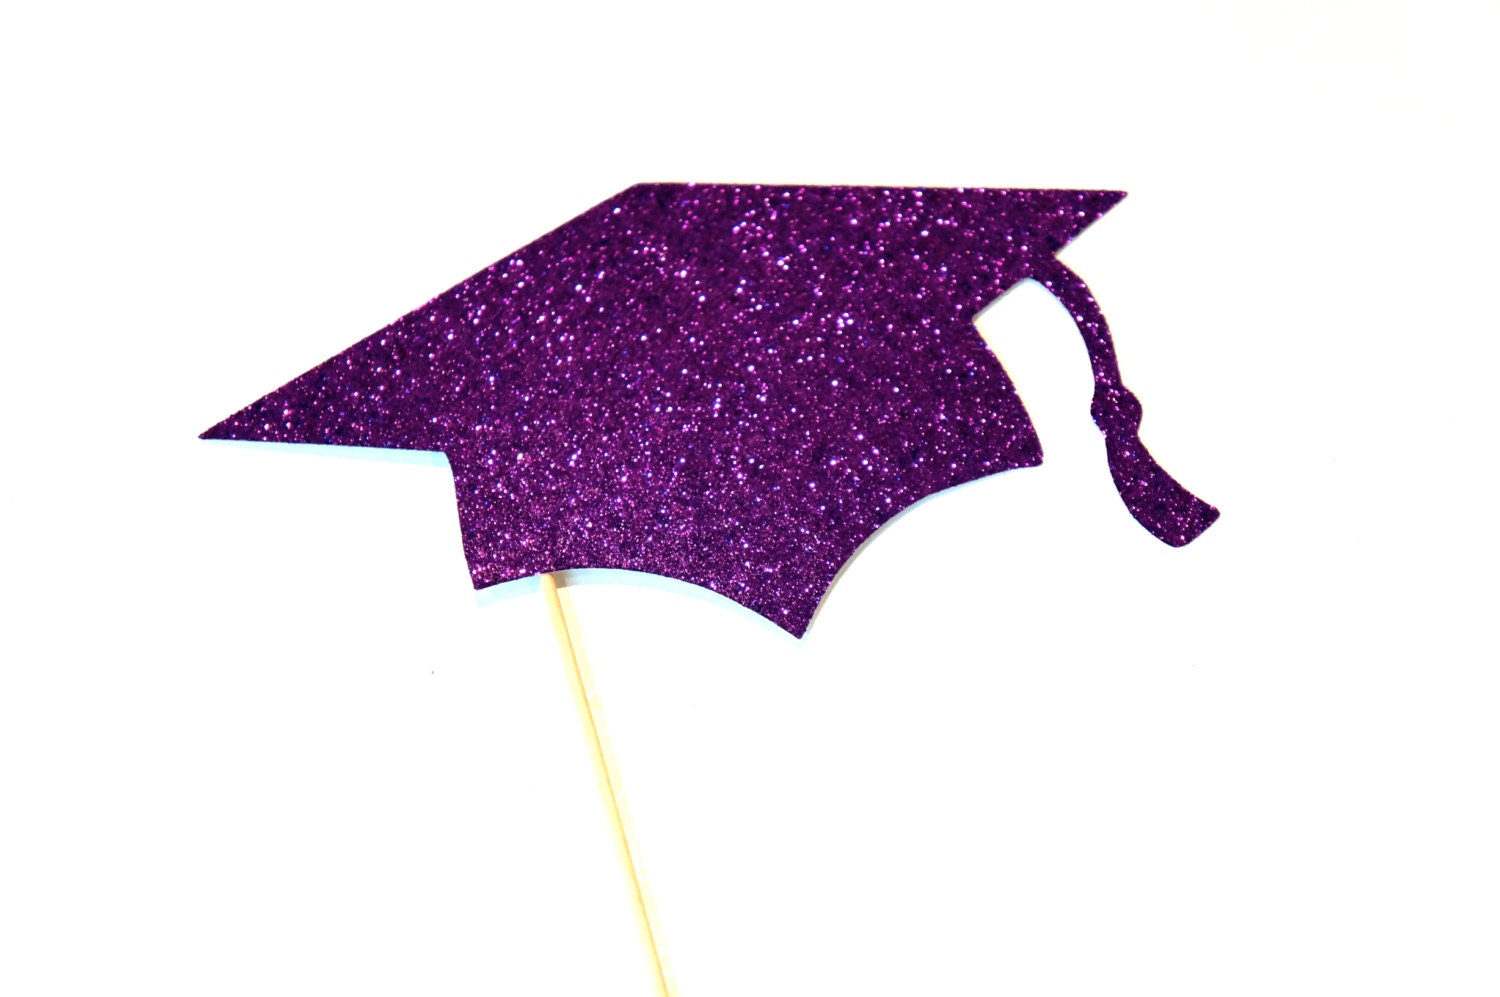 Glitter Graduation Hat Die Cuts in Gold, Silver, Black or White, Cut Outs  Sizes 2 to 5 Inches, Cupcake Toppers, Party, Wedding Decor - Etsy